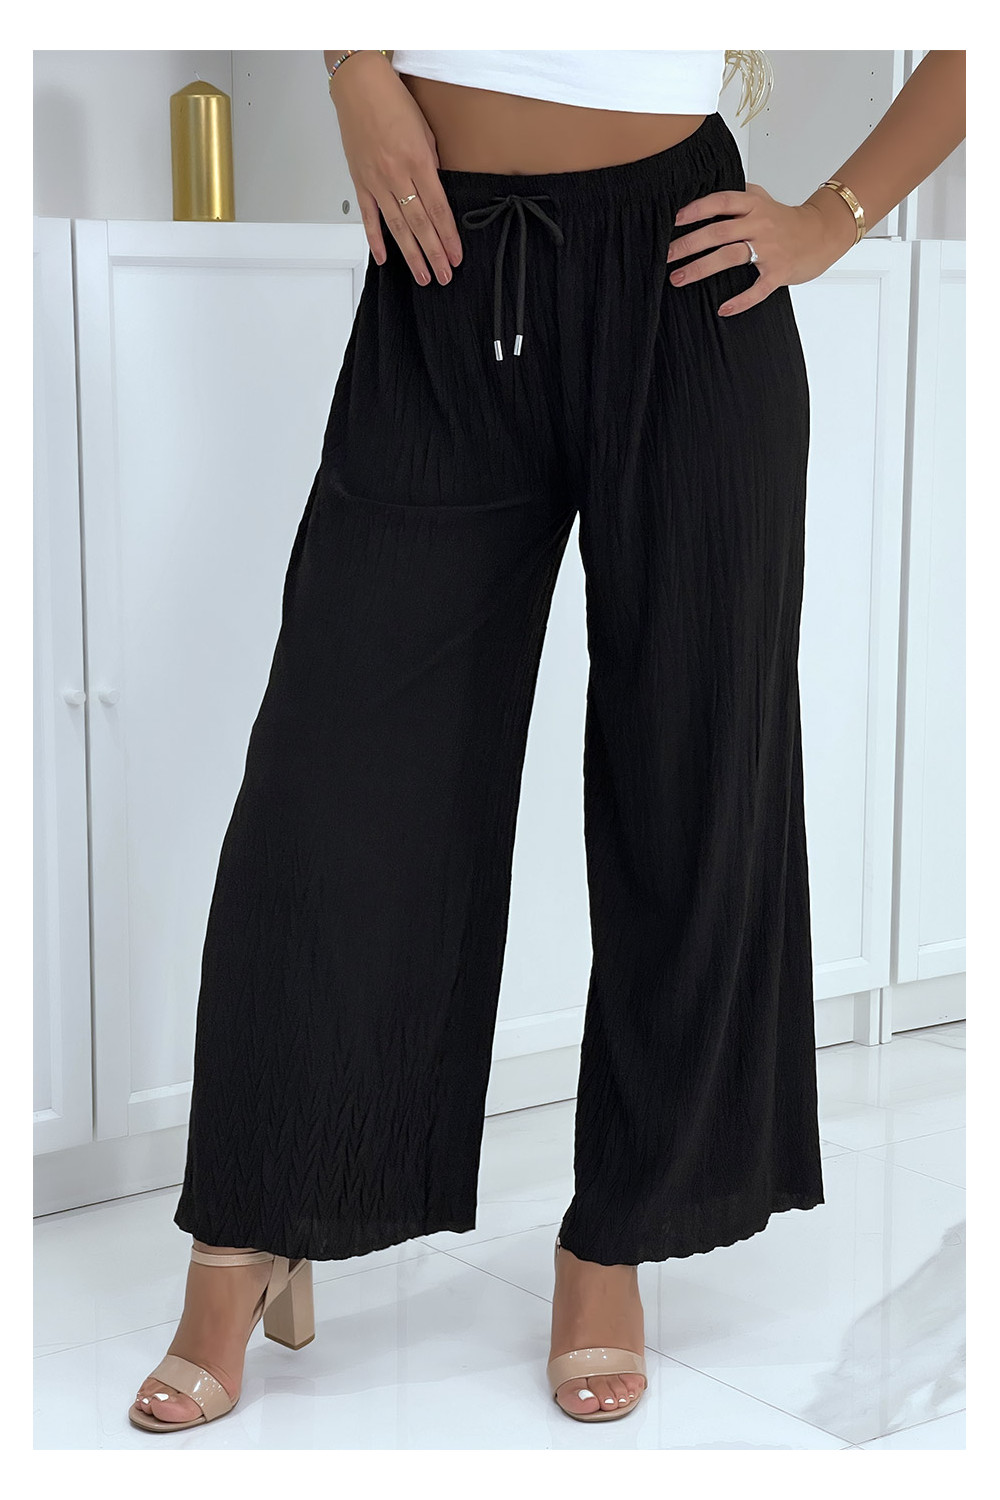 Update more than 151 black pleated palazzo pants - in.eteachers